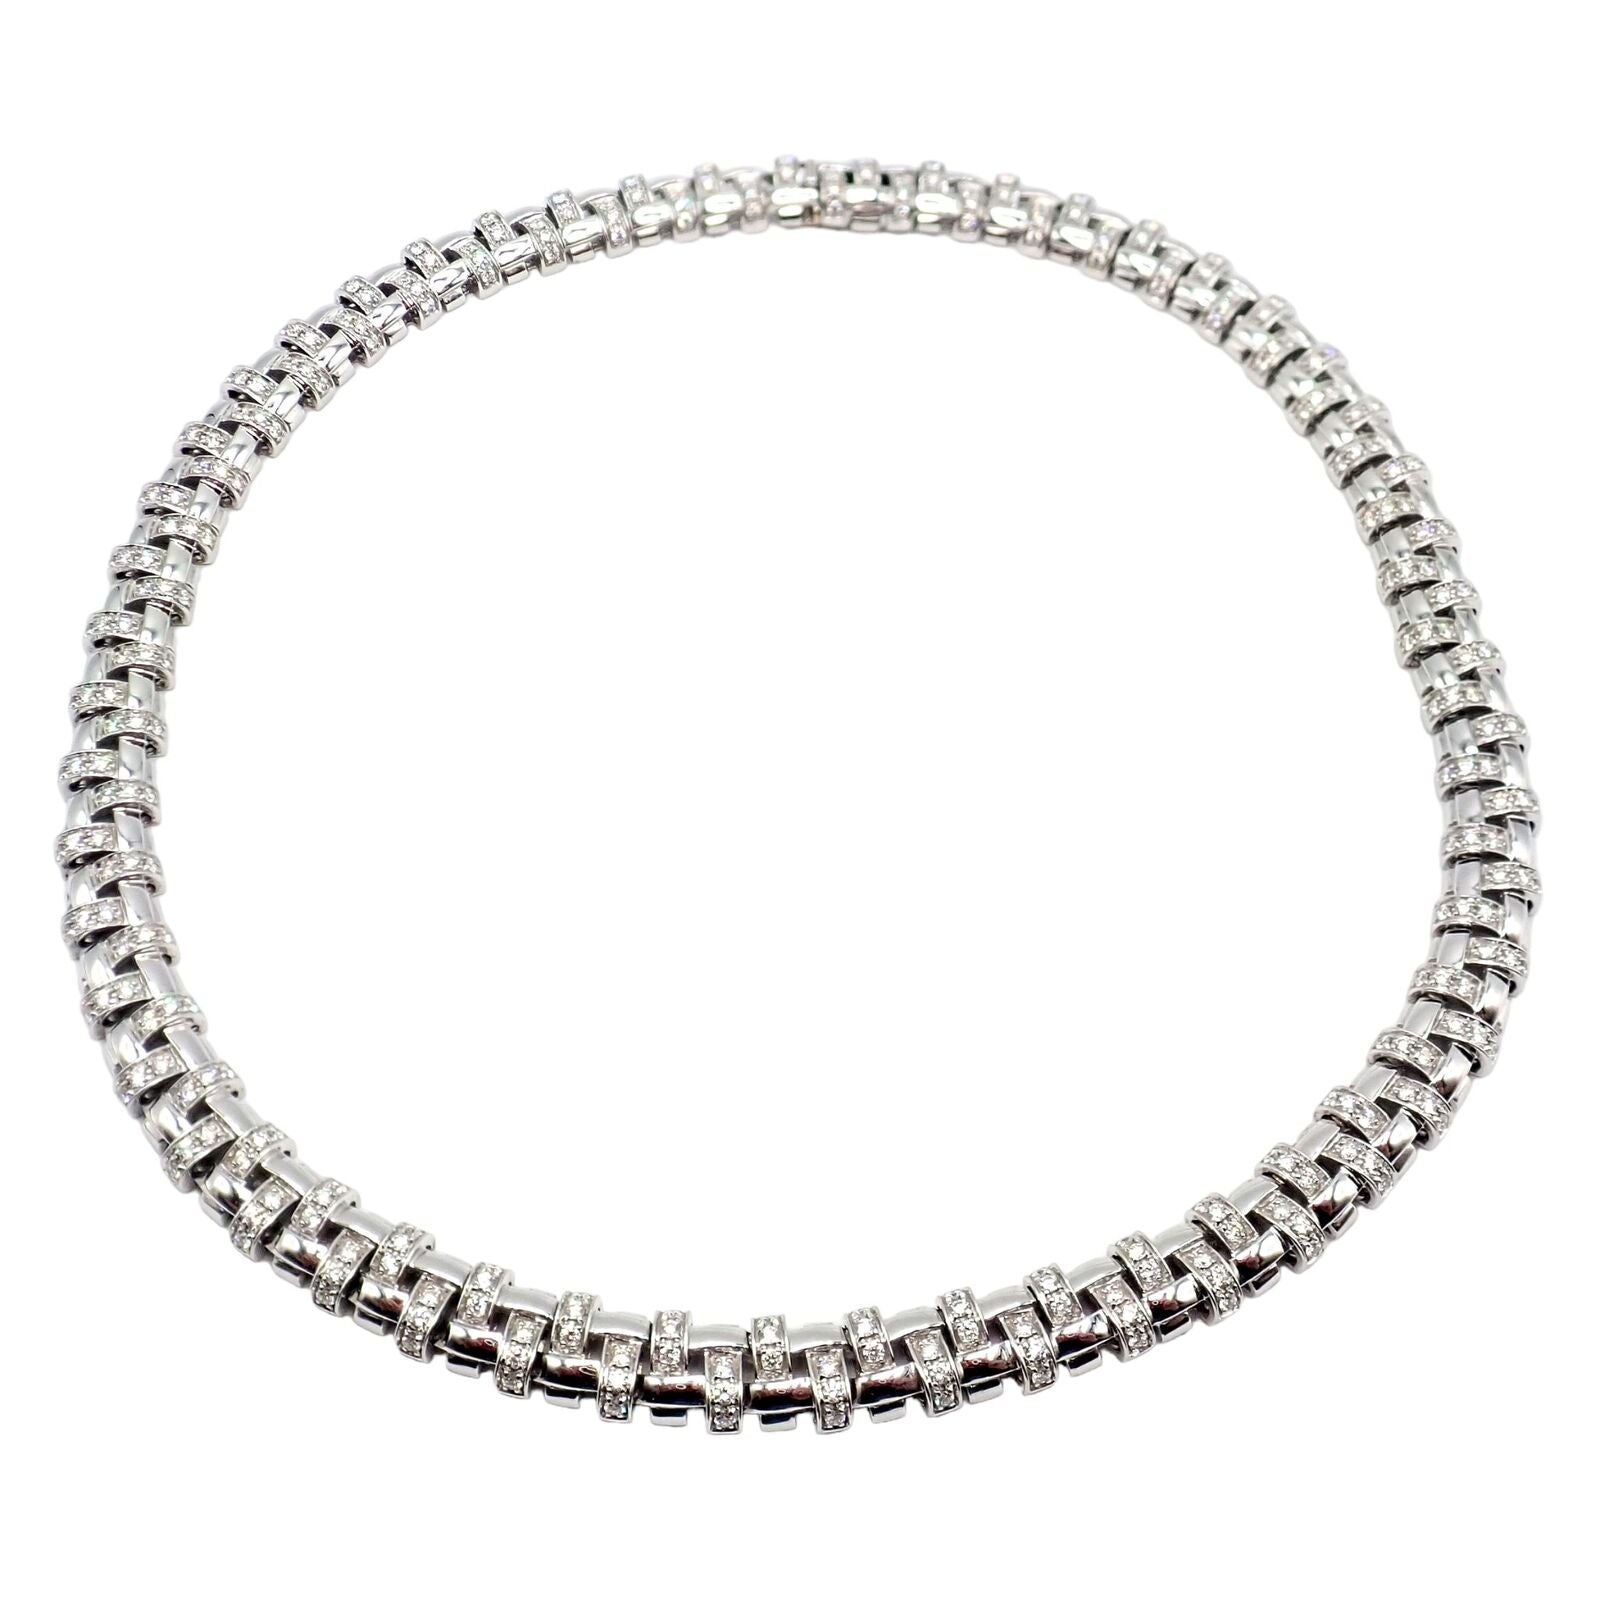 Tiffany & Co. Jewelry & Watches:Fine Jewelry:Necklaces & Pendants Authentic! Tiffany & Co Vannerie 18k White Gold Basket Weave Diamond Necklace